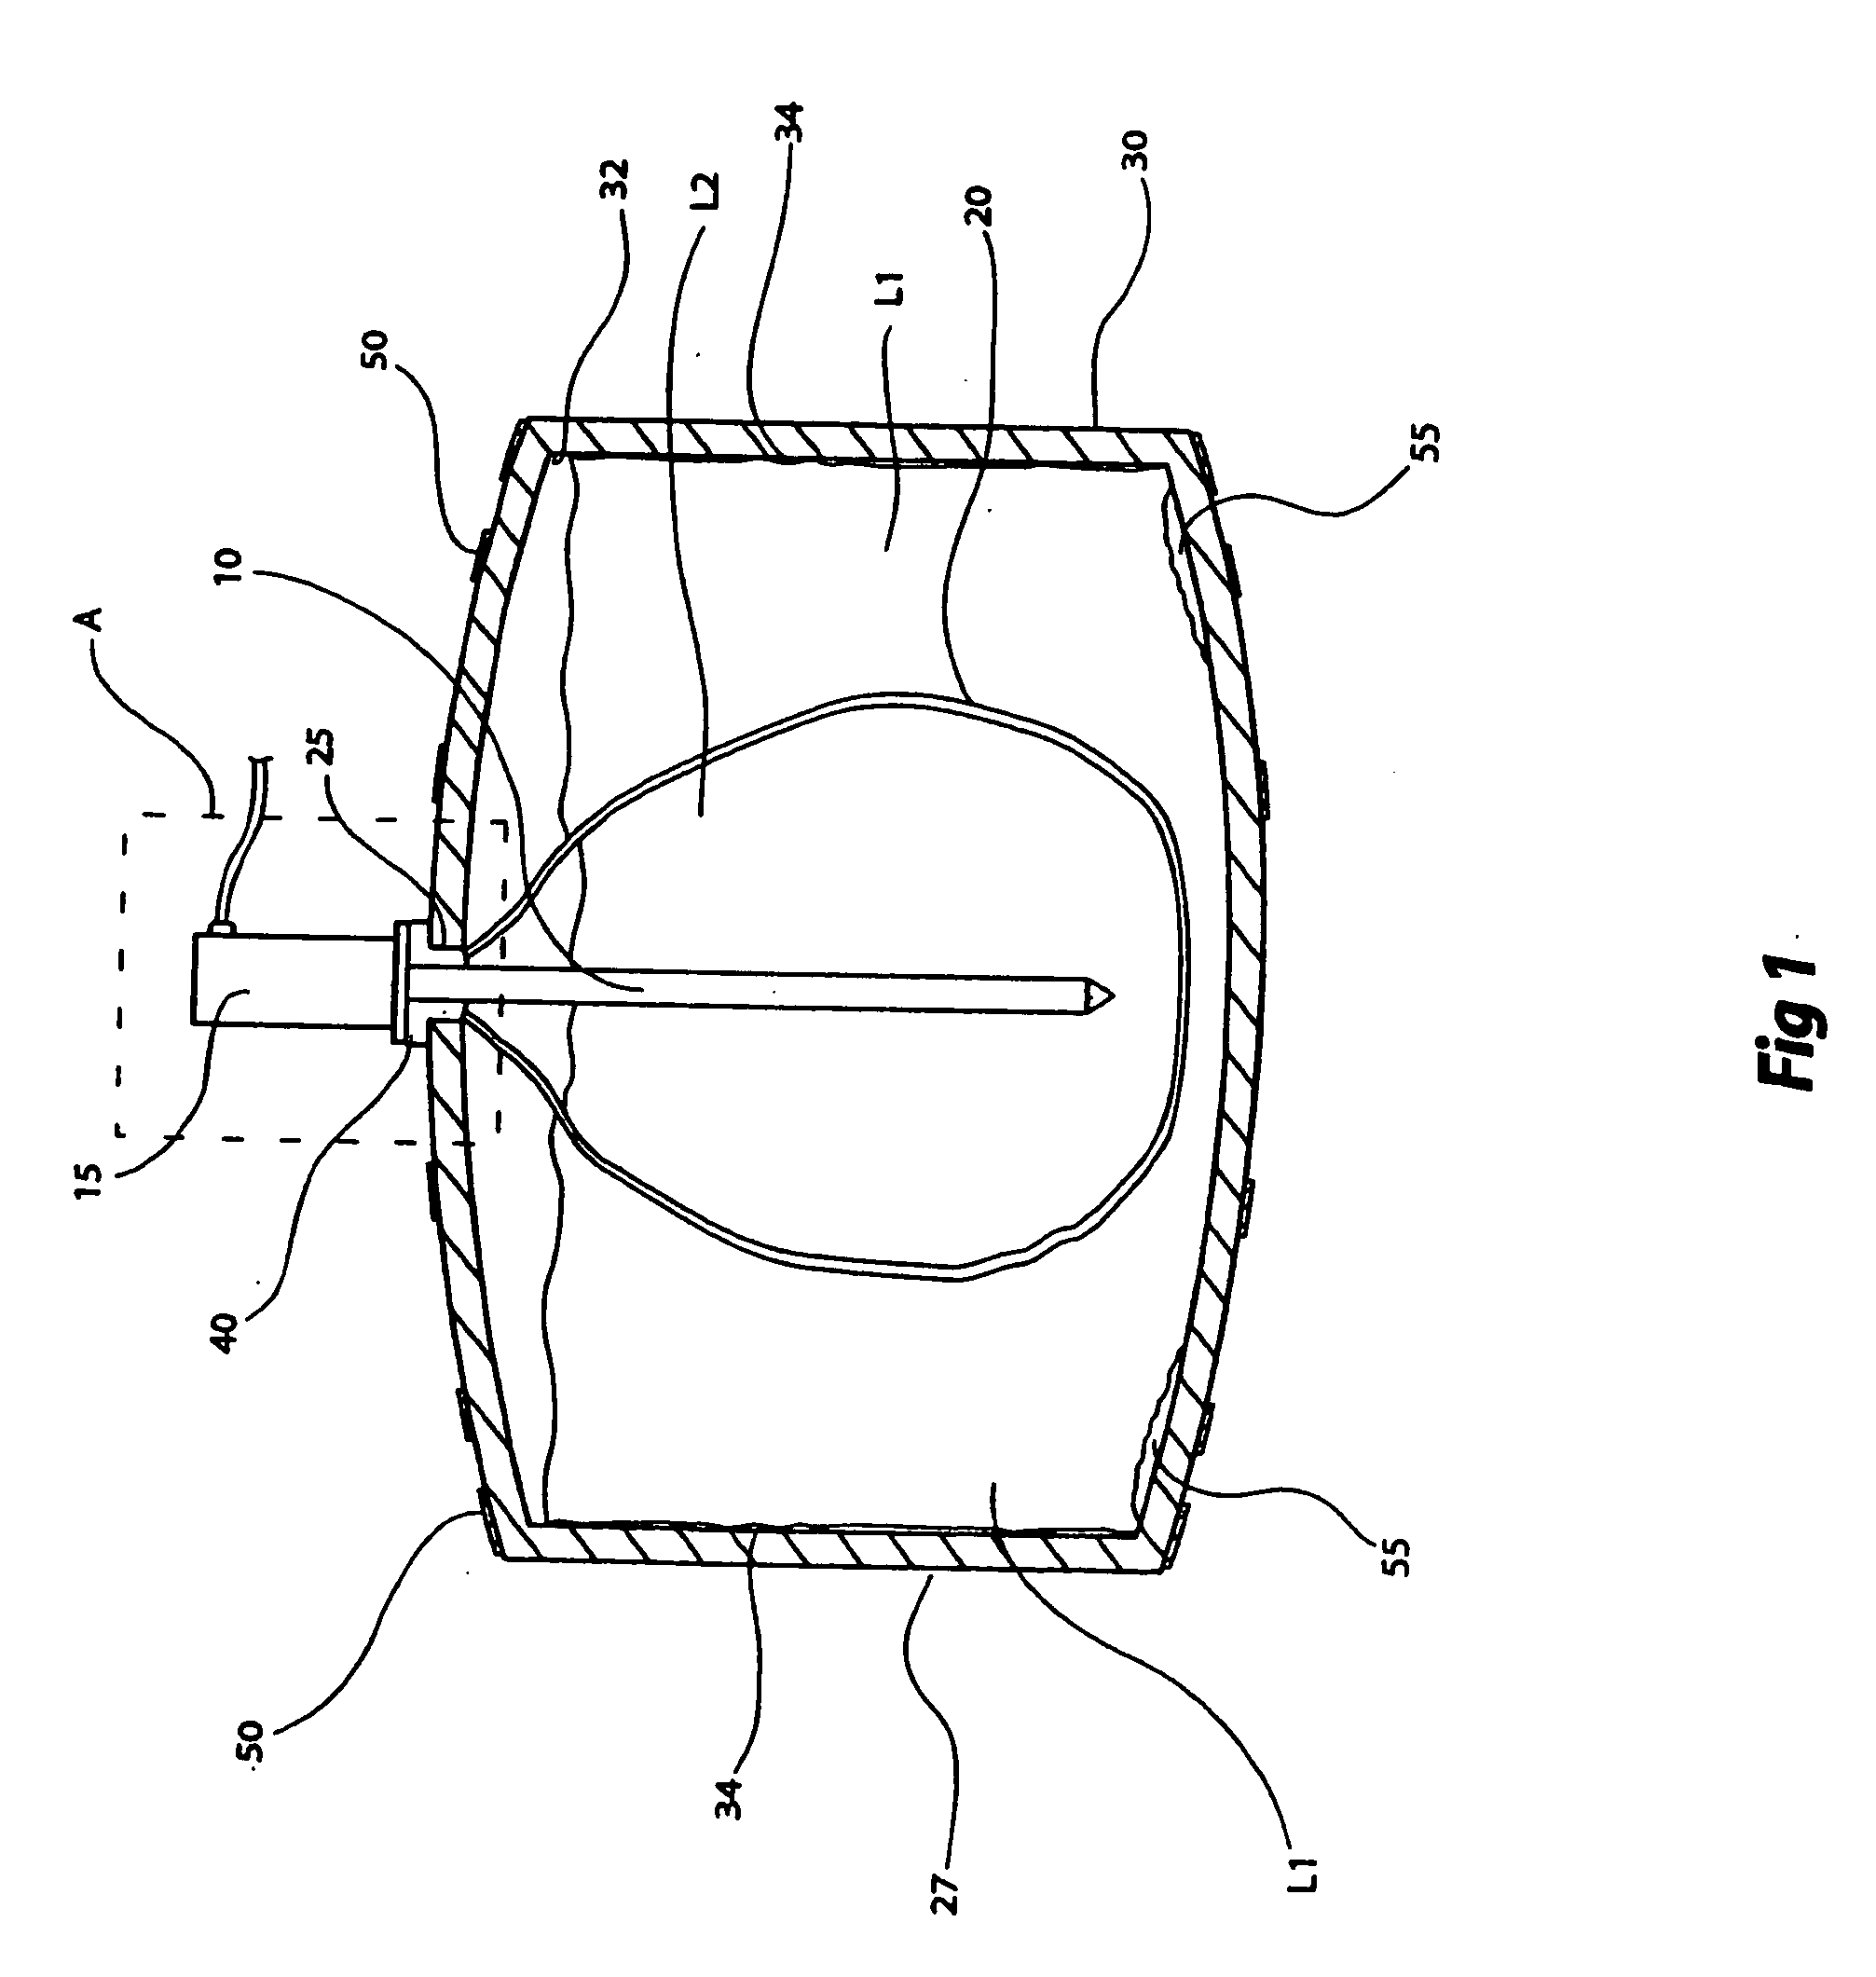 Apparatus and method of ultrasonic cleaning and disinfection